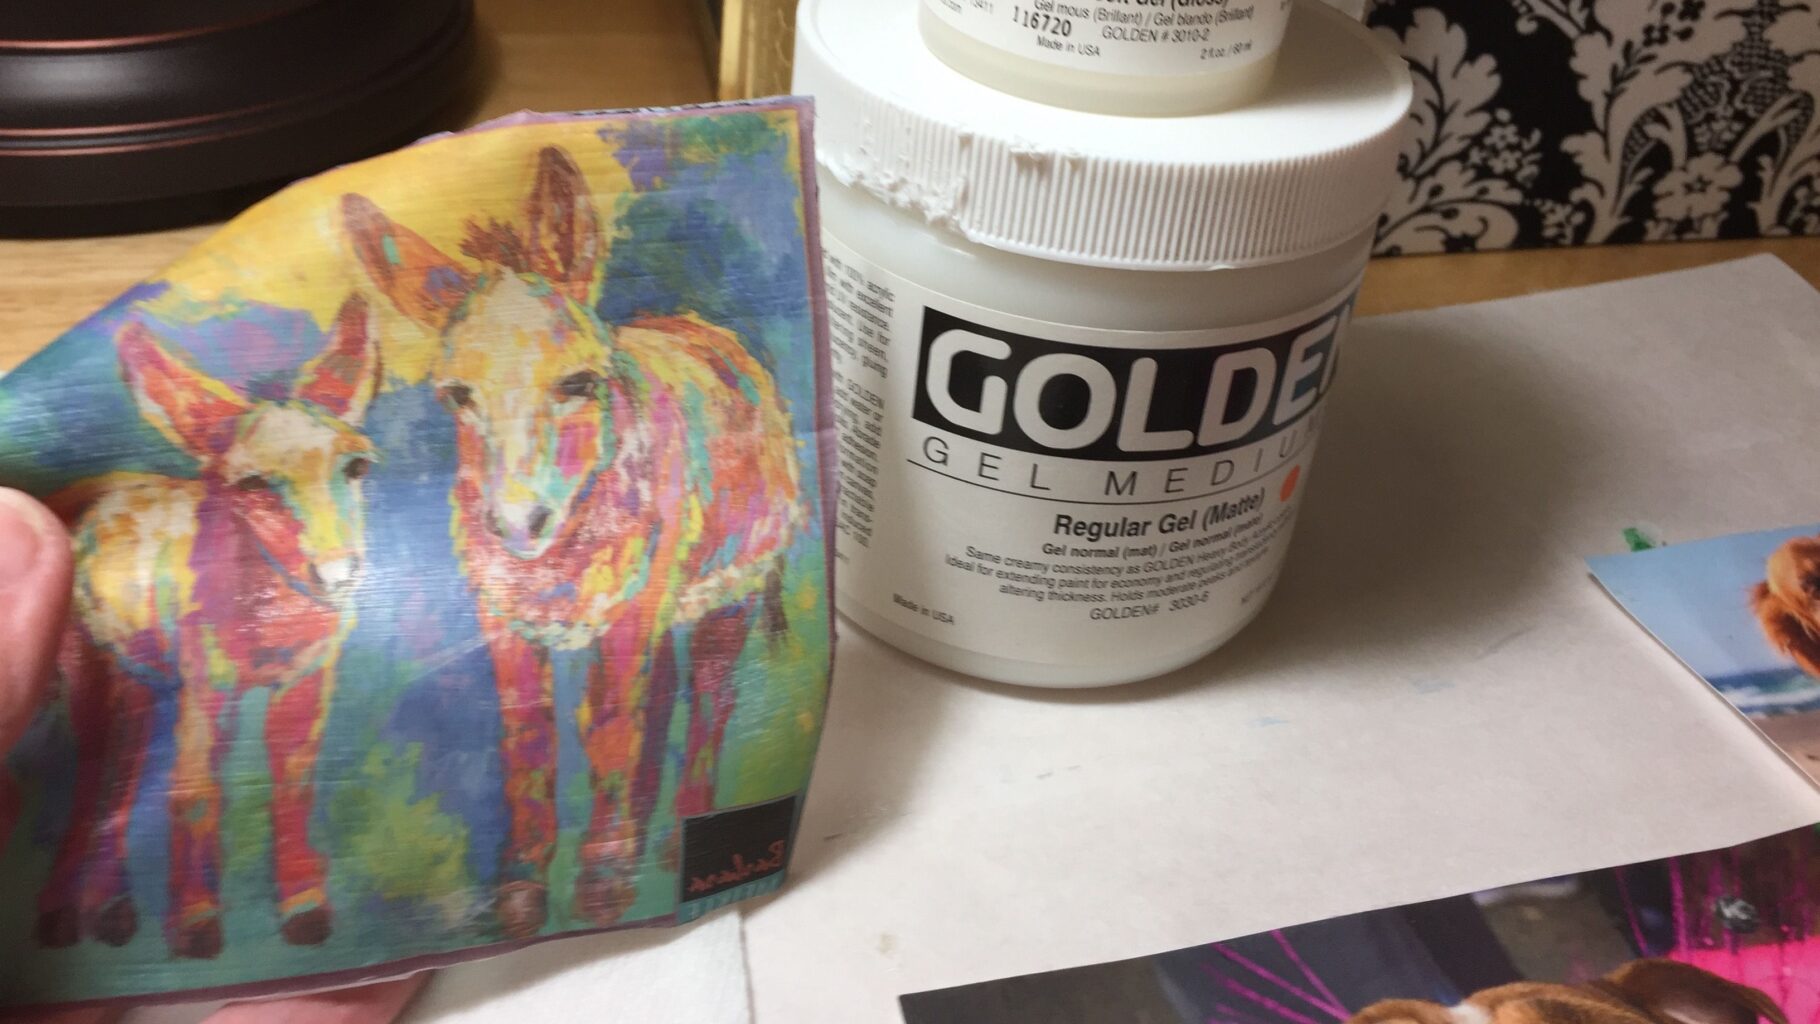 photo shows a tub of Golden Gel Medium and a colorful image transfer of two donkeys